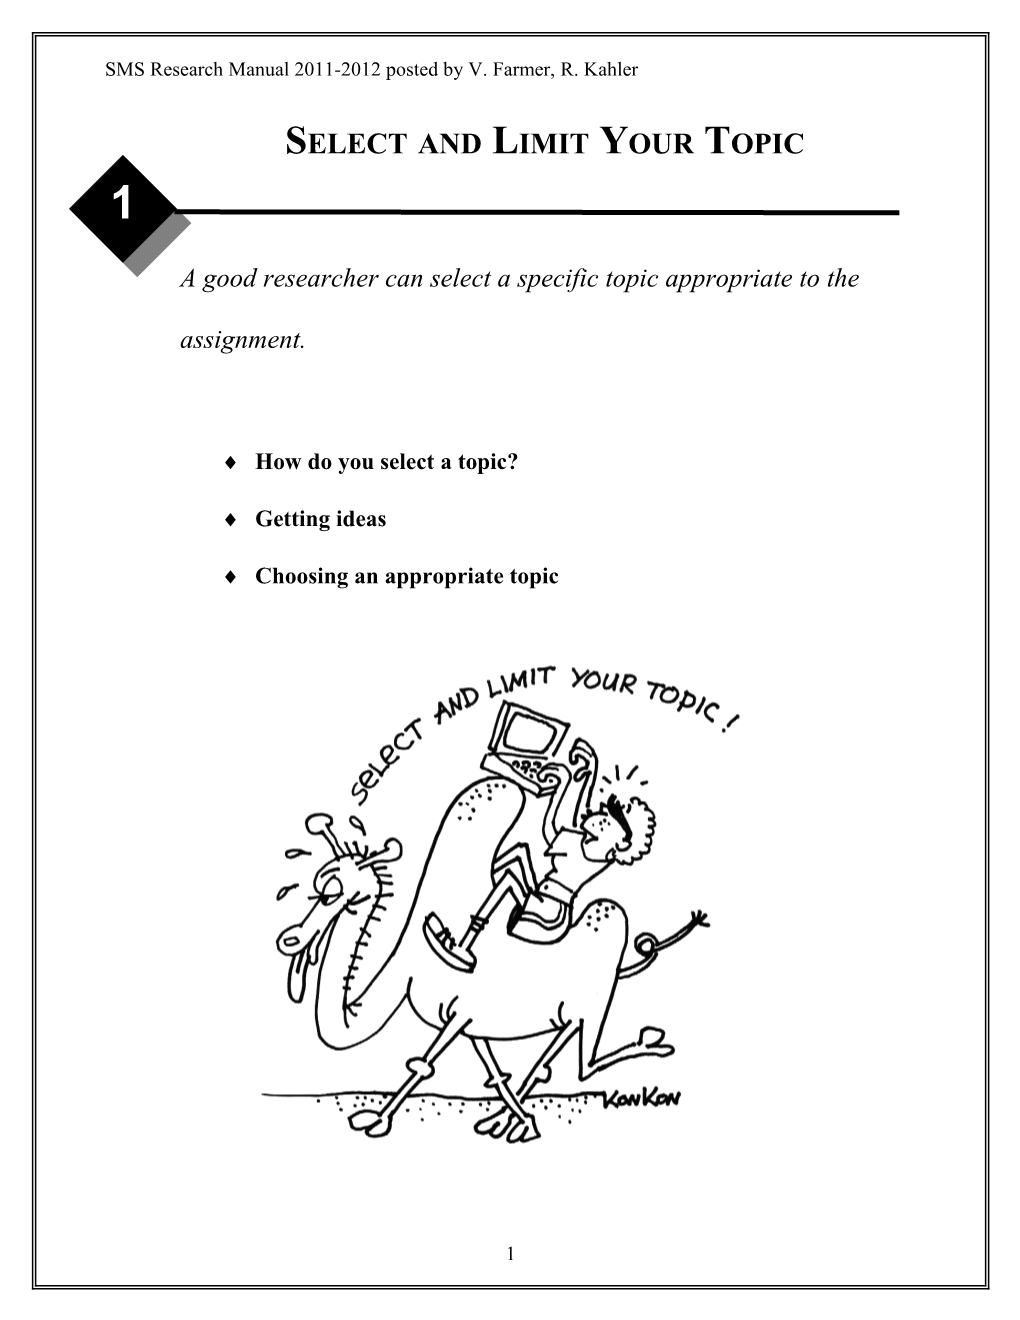 SMS Research Manual 2011-2012 Posted by V. Farmer, R. Kahler